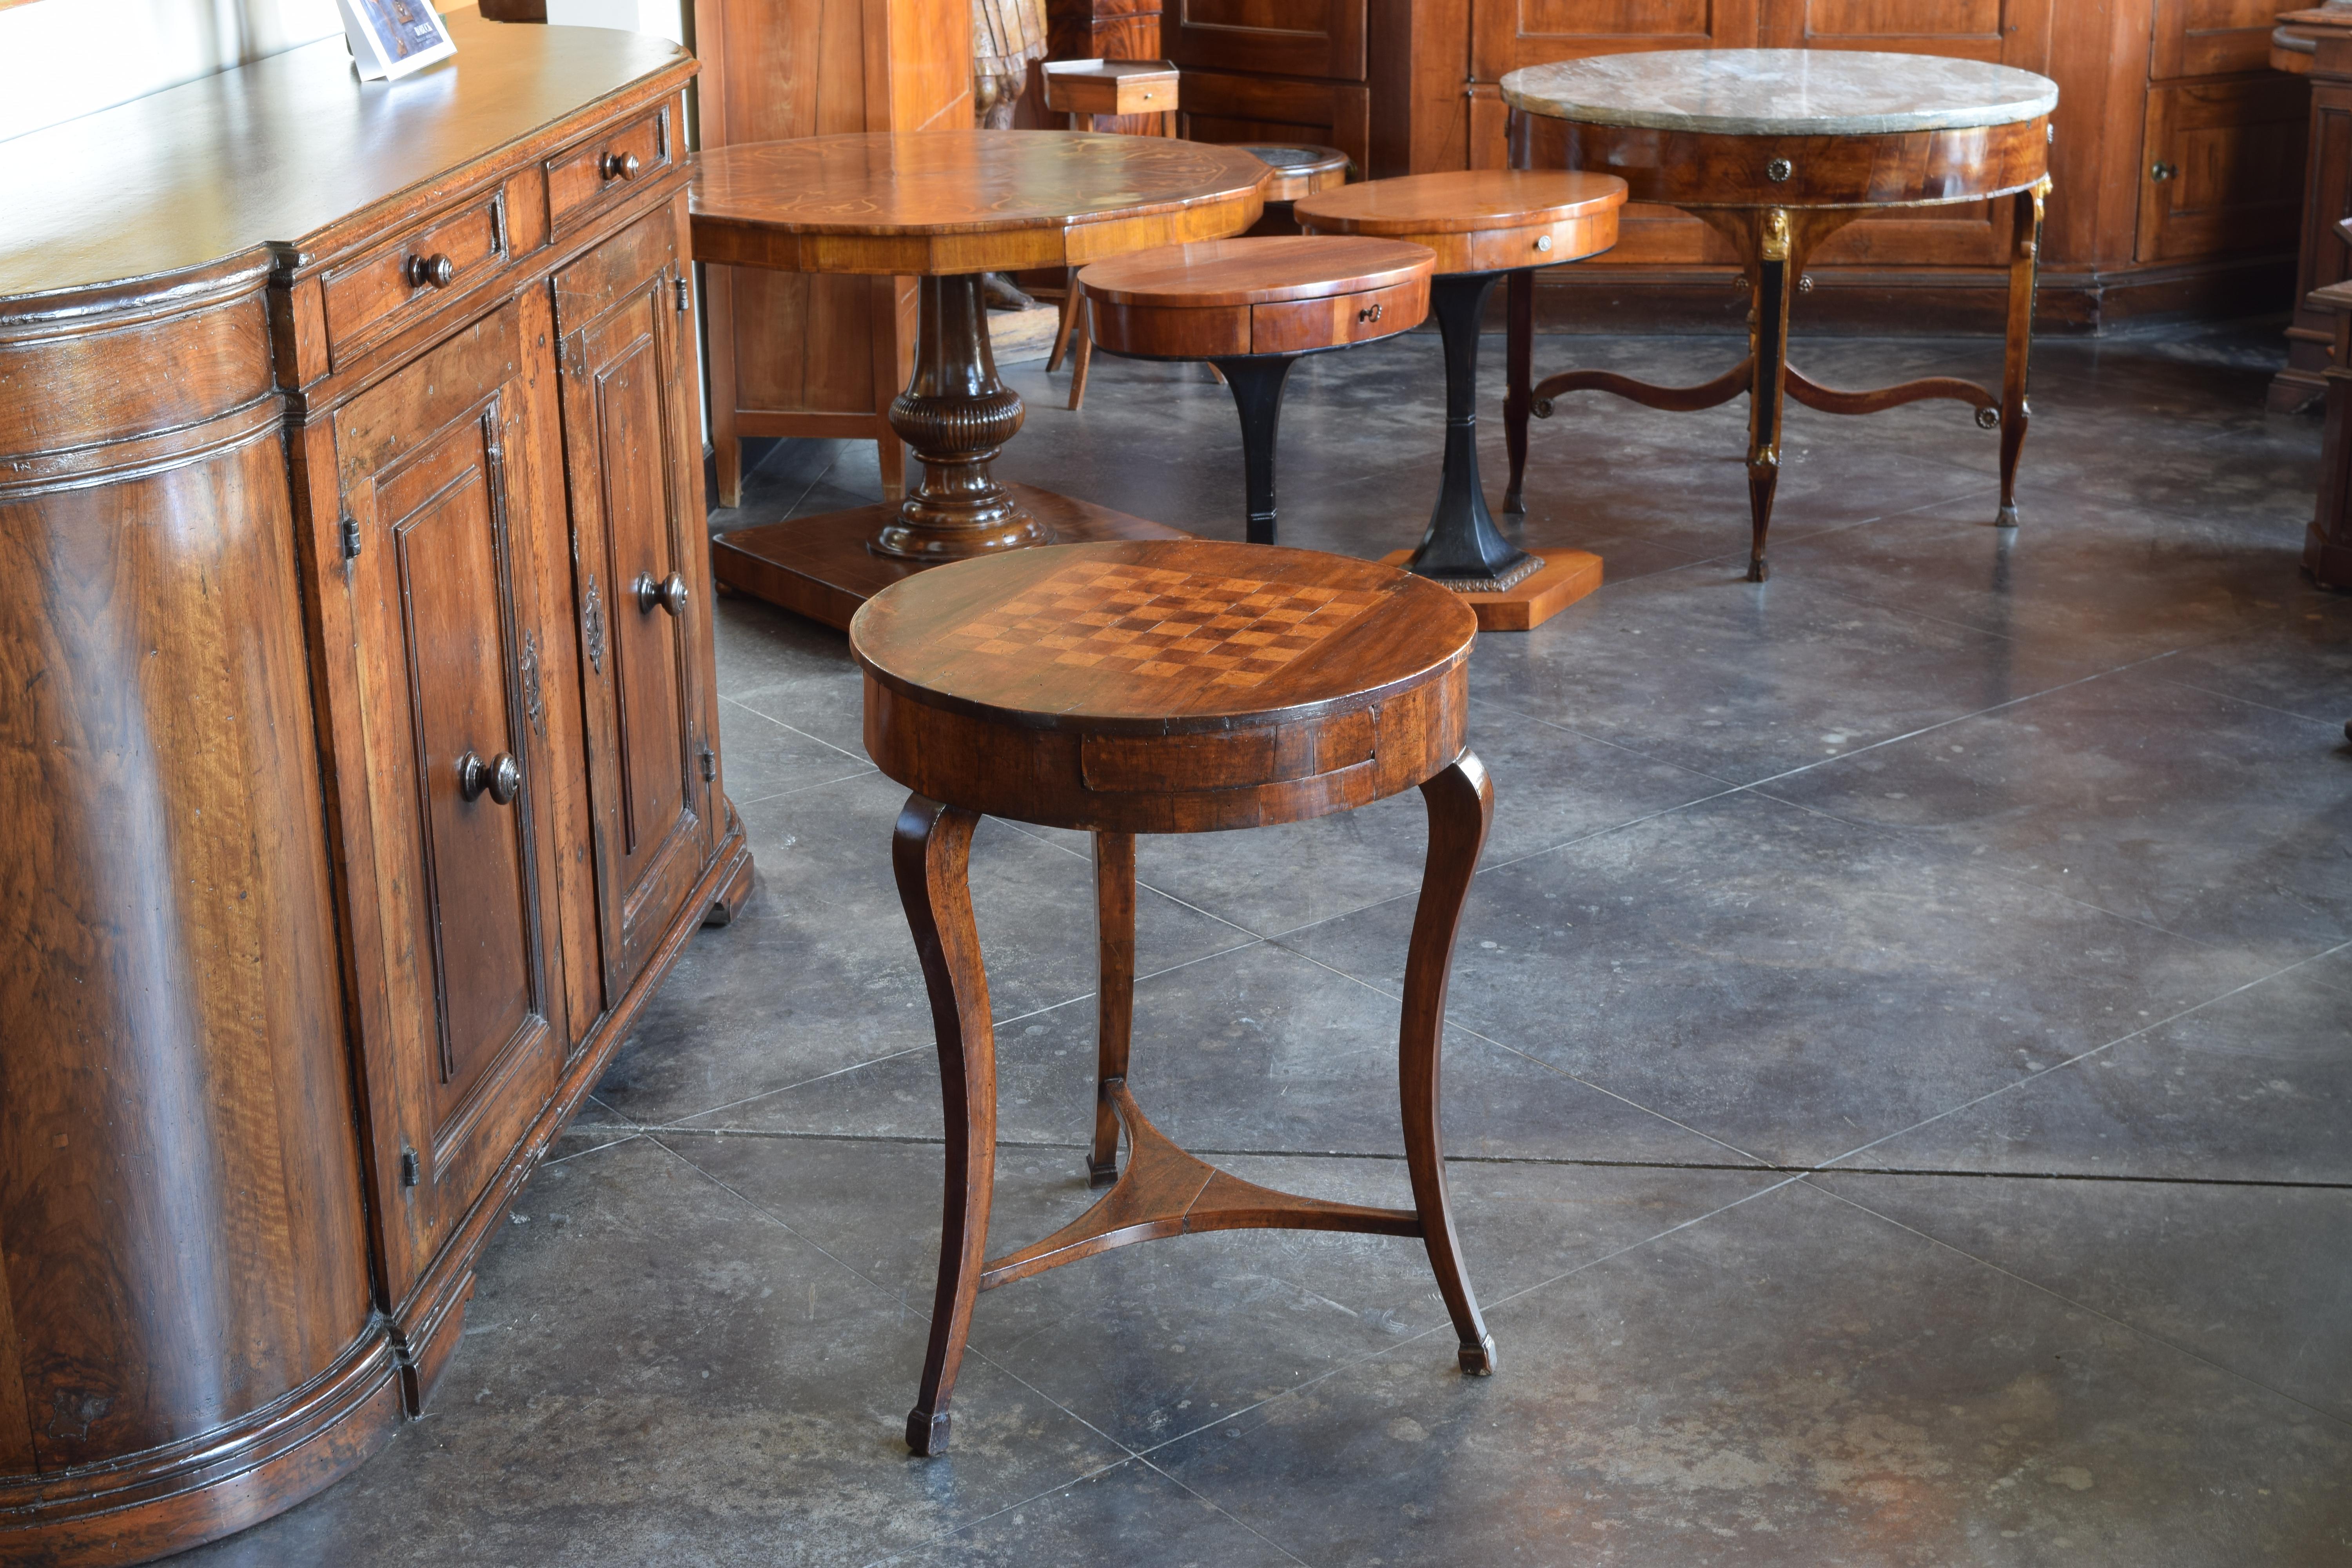 Made of solid walnut, the circular top with an inlaid game board, the case having three drawers and raised on curving legs joined by a shaped stretcher, the legs ending in block feet, second quarter of the 19th century.